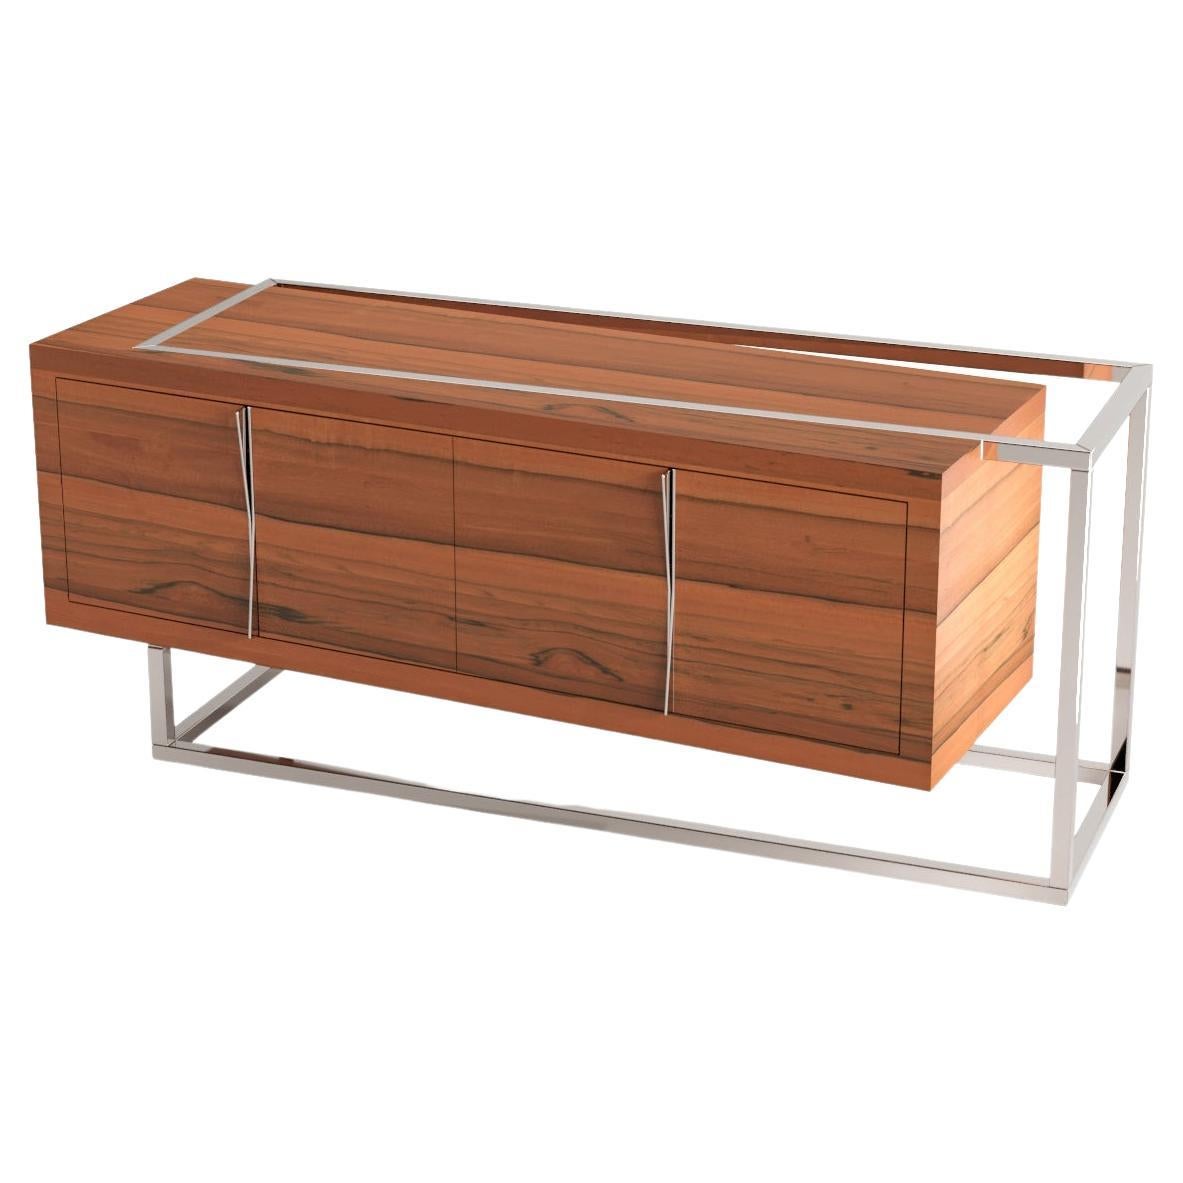 Modern Minimalist Credenza Sideboard in Tineo Wood and Brushed Stainless Steel